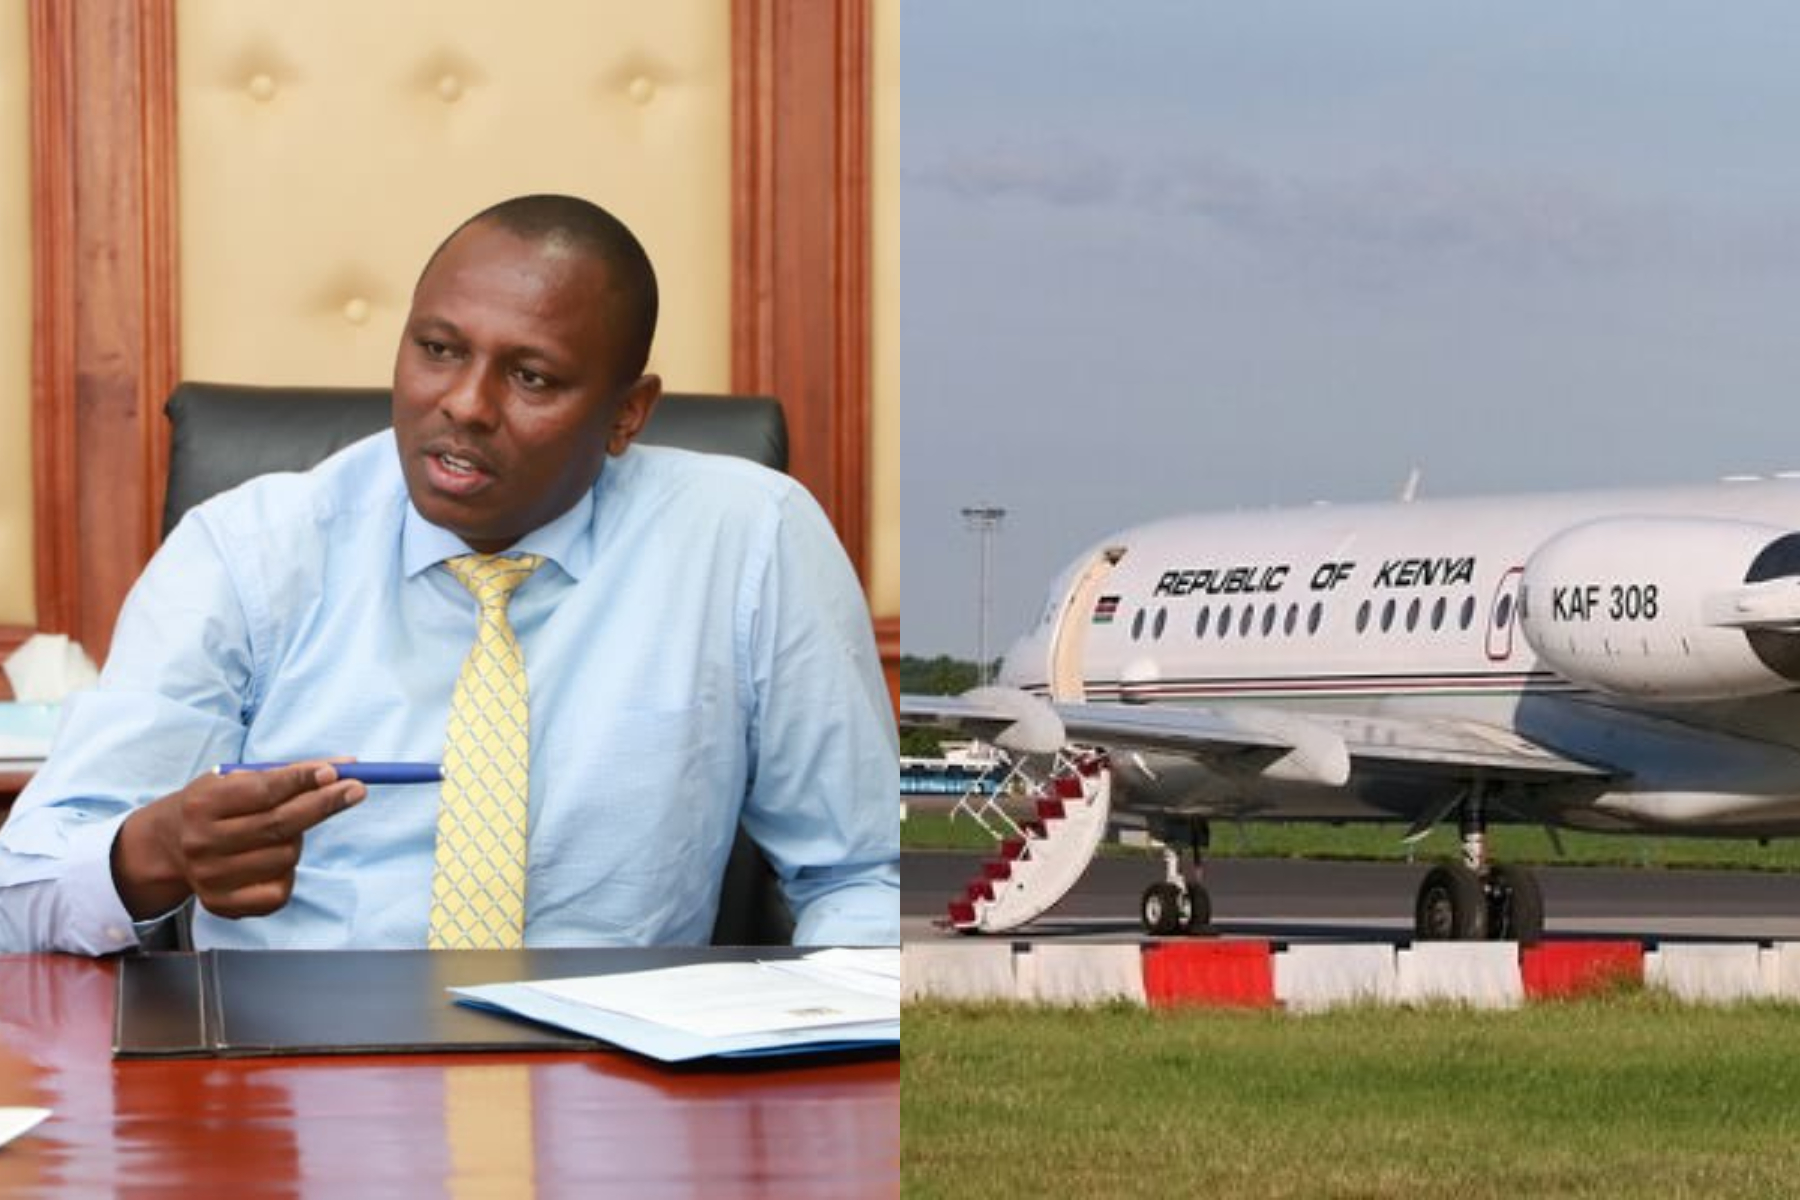 Photo collage of Kimani ichung'wah and the Presidential jet.